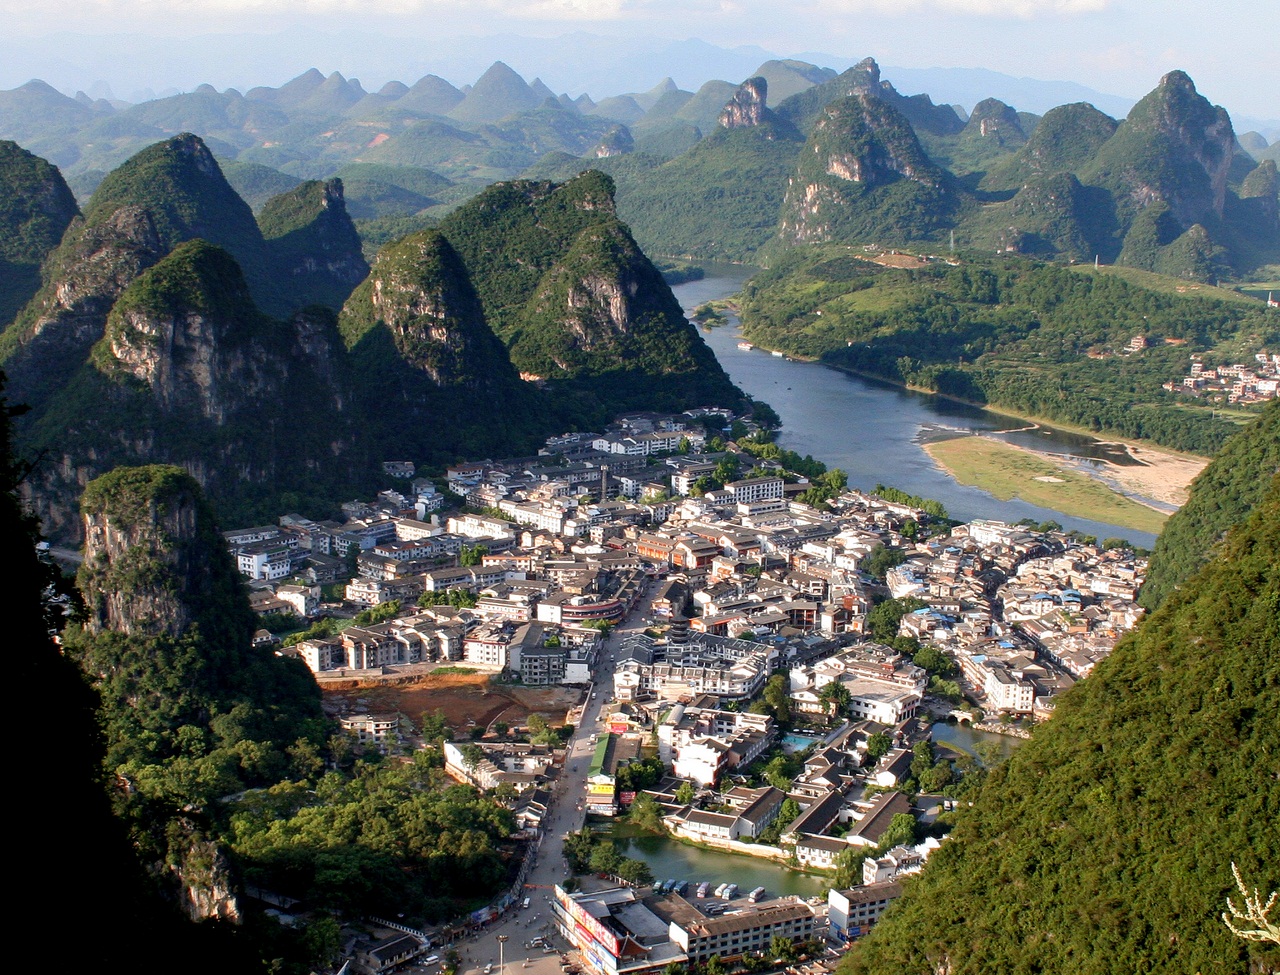 Yangshuo, China: From the TV tower